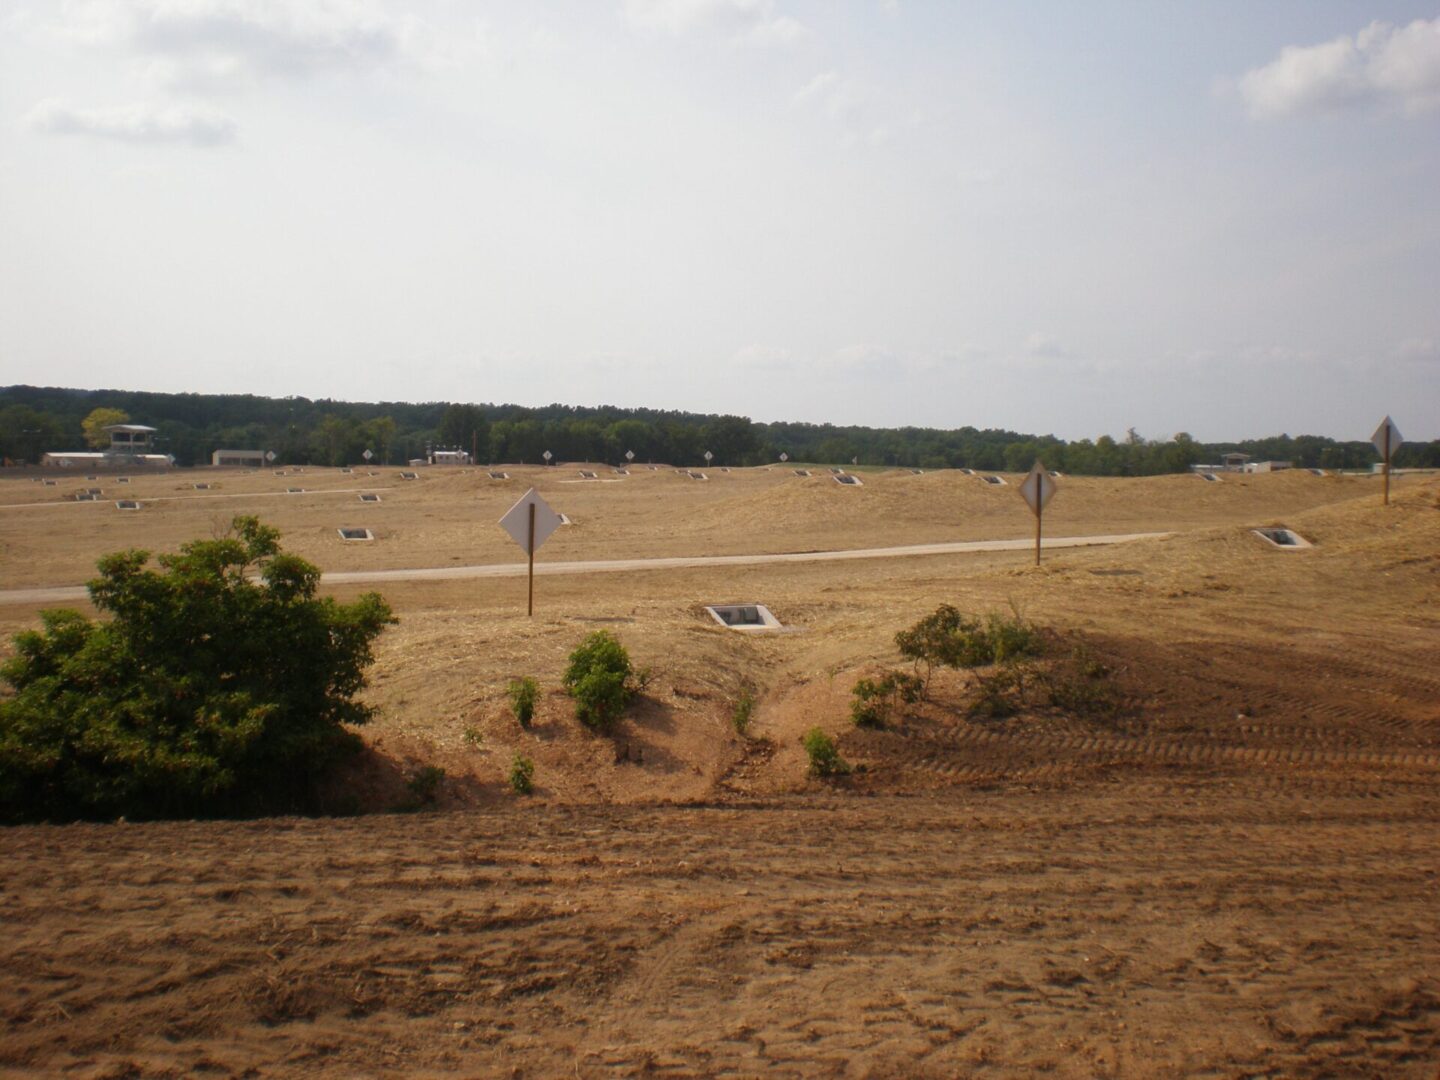 A newly constructed road intersection with yield signs, surrounded by a cleared and undeveloped area with a few scattered trees in the background.